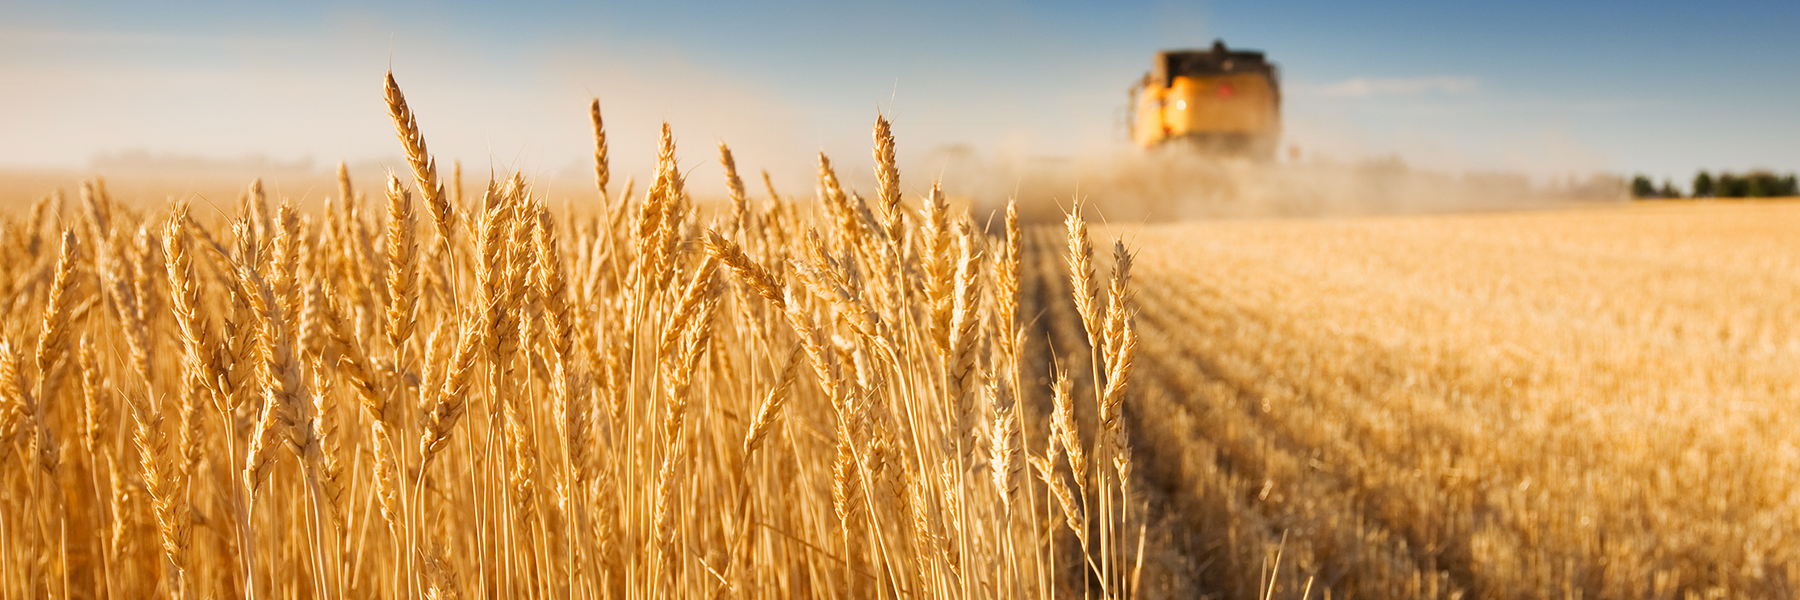 Cereals wheat